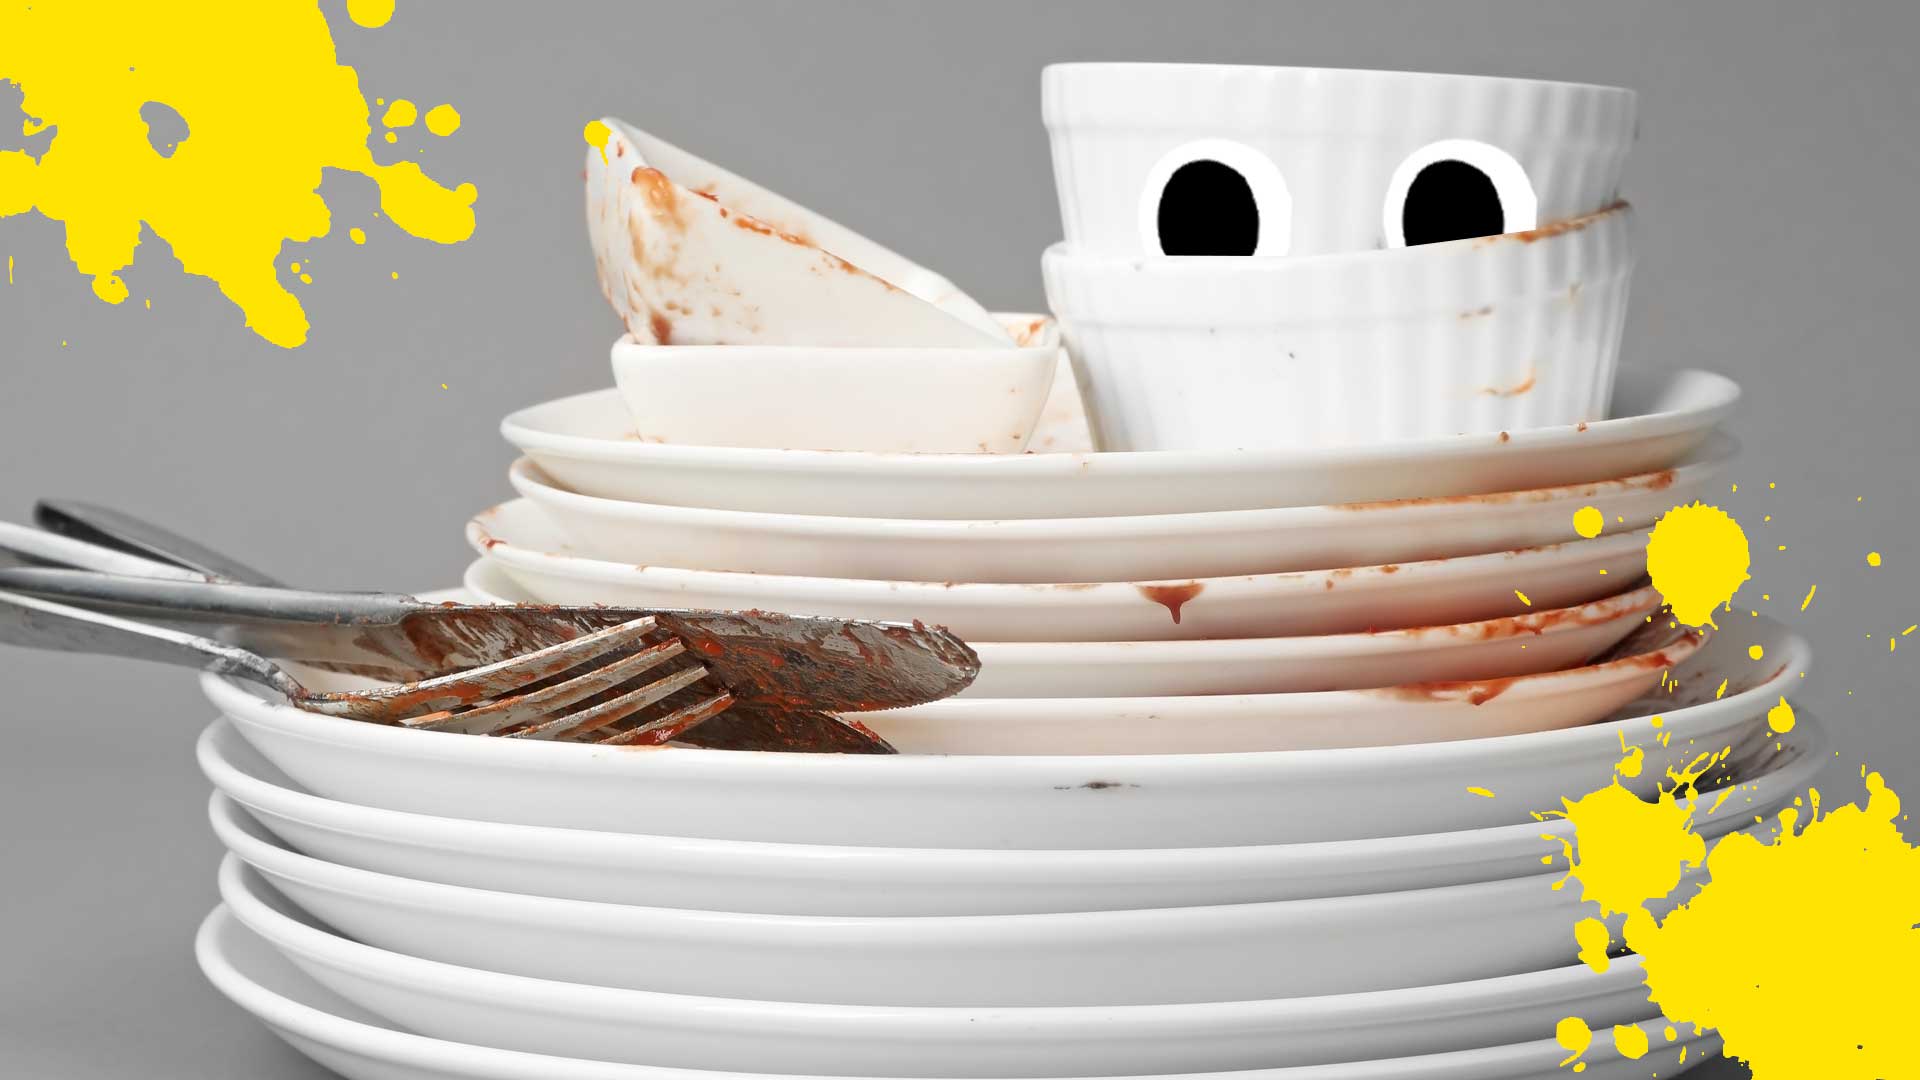 A pile of dirty plates